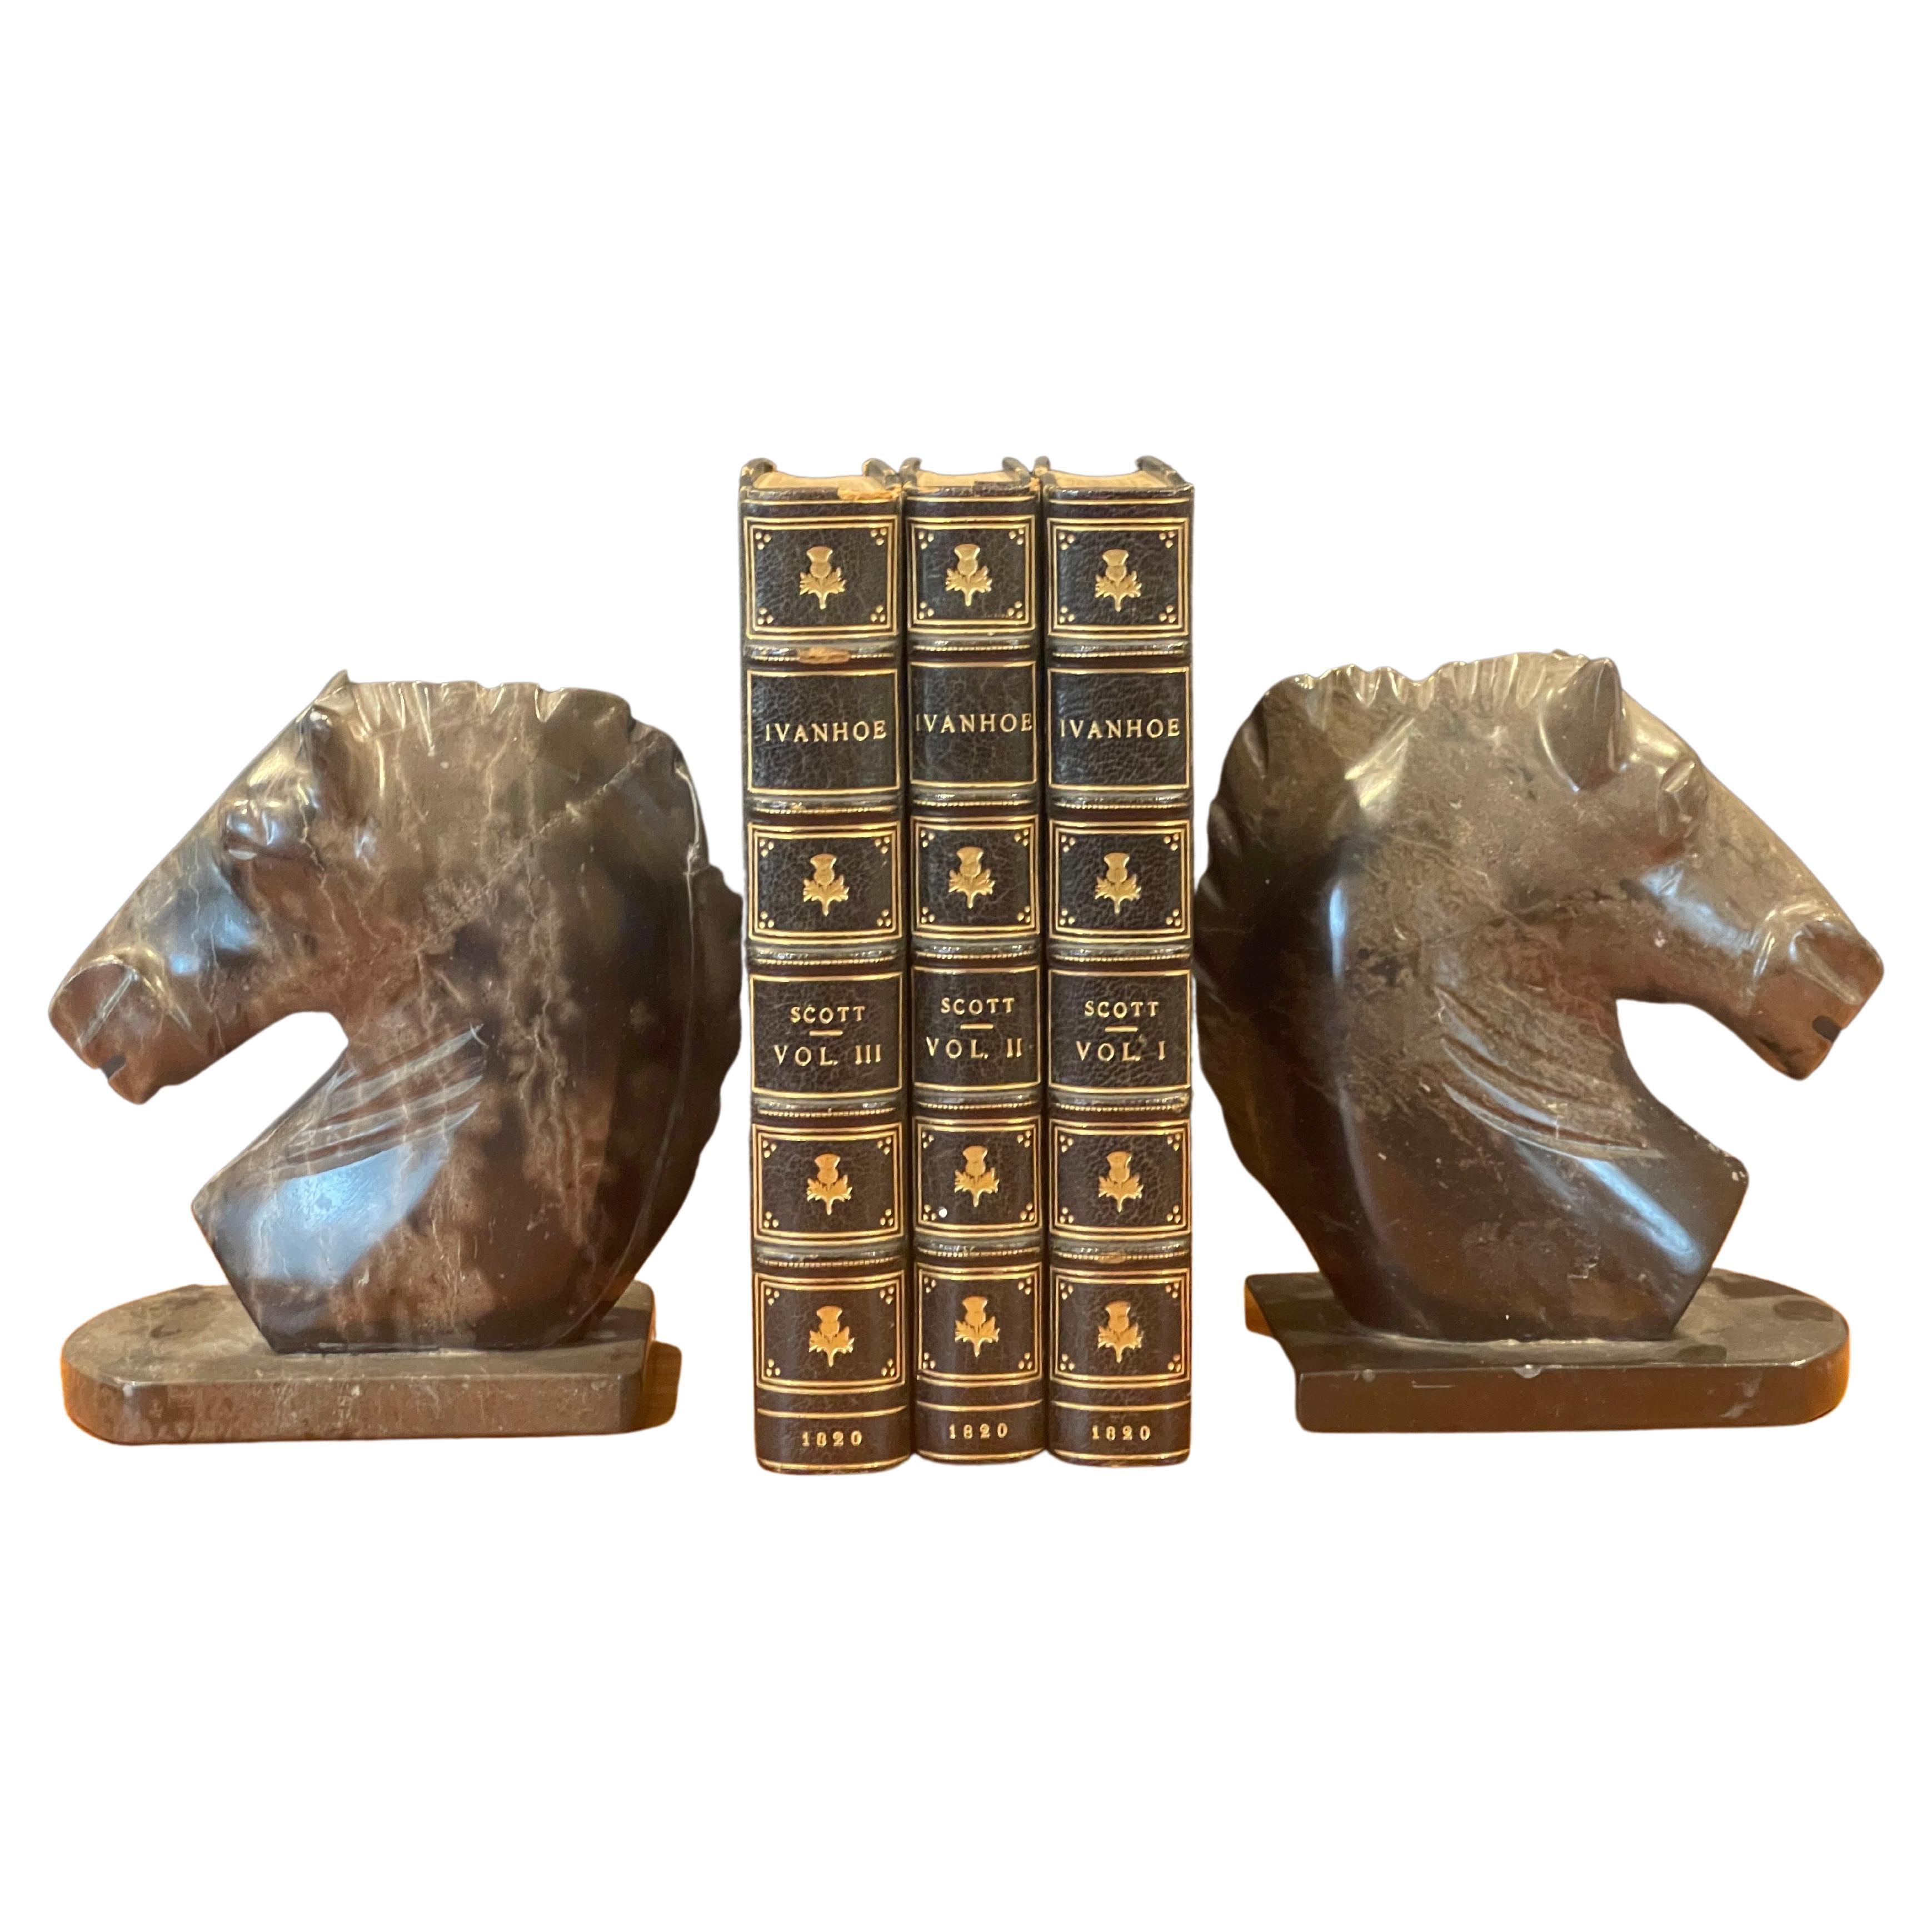 Very nice pair of vintage marble horse head bookends, circa 1940s. The bookends are heavy and solid and well crafted. They measure 11.75